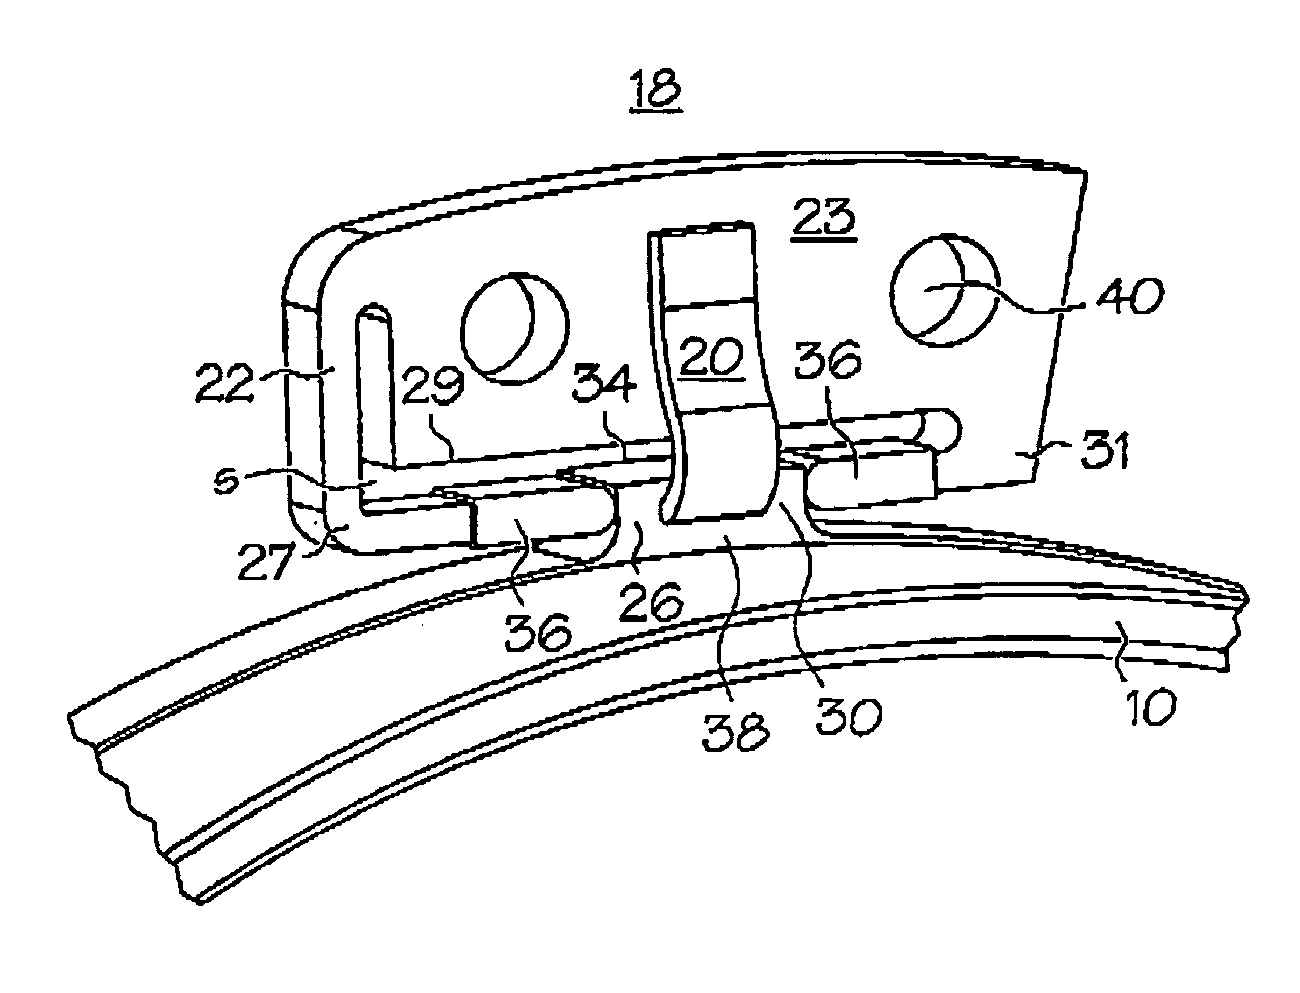 Compliant mounting system for turbine shrouds